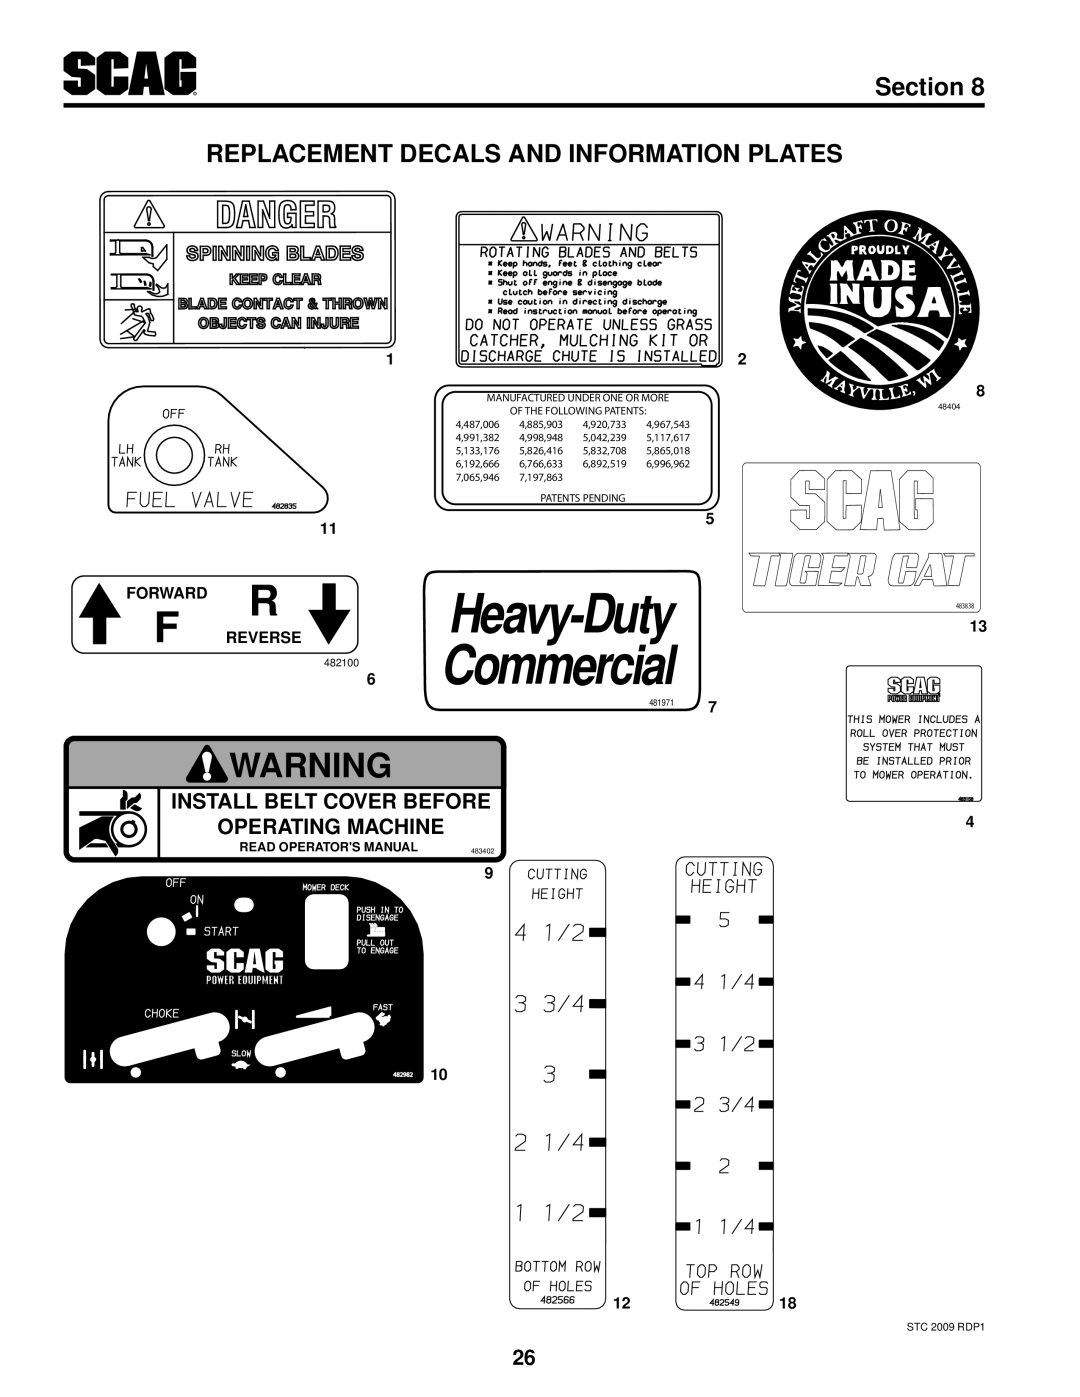 Scag Power Equipment SMTC-48V, SMWC-61V, SMWC-52V manual Replacement Decals And Information Plates, Heavy-Duty, Section 